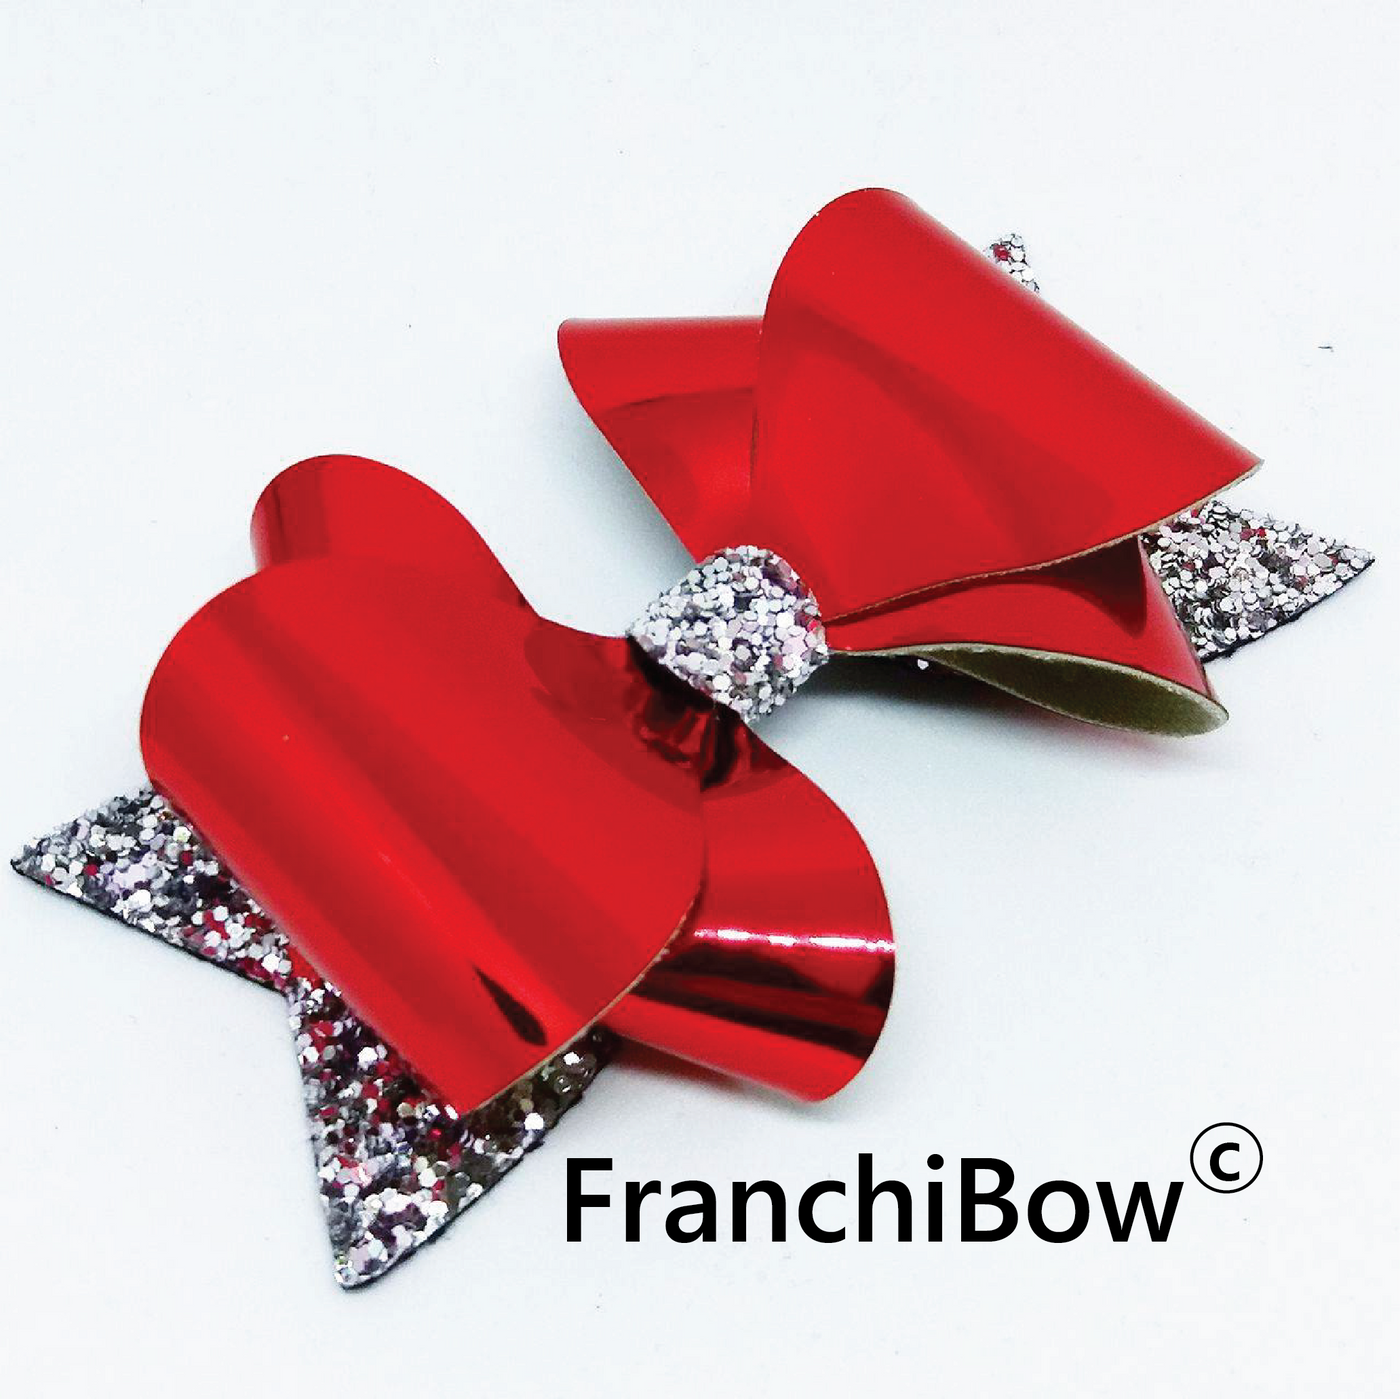 FranchiBow Steel Rule Die for Sizzix Big Shot  - 4 Sizes to select - 2.5", 3.5", 4.5" and XL 5.5"